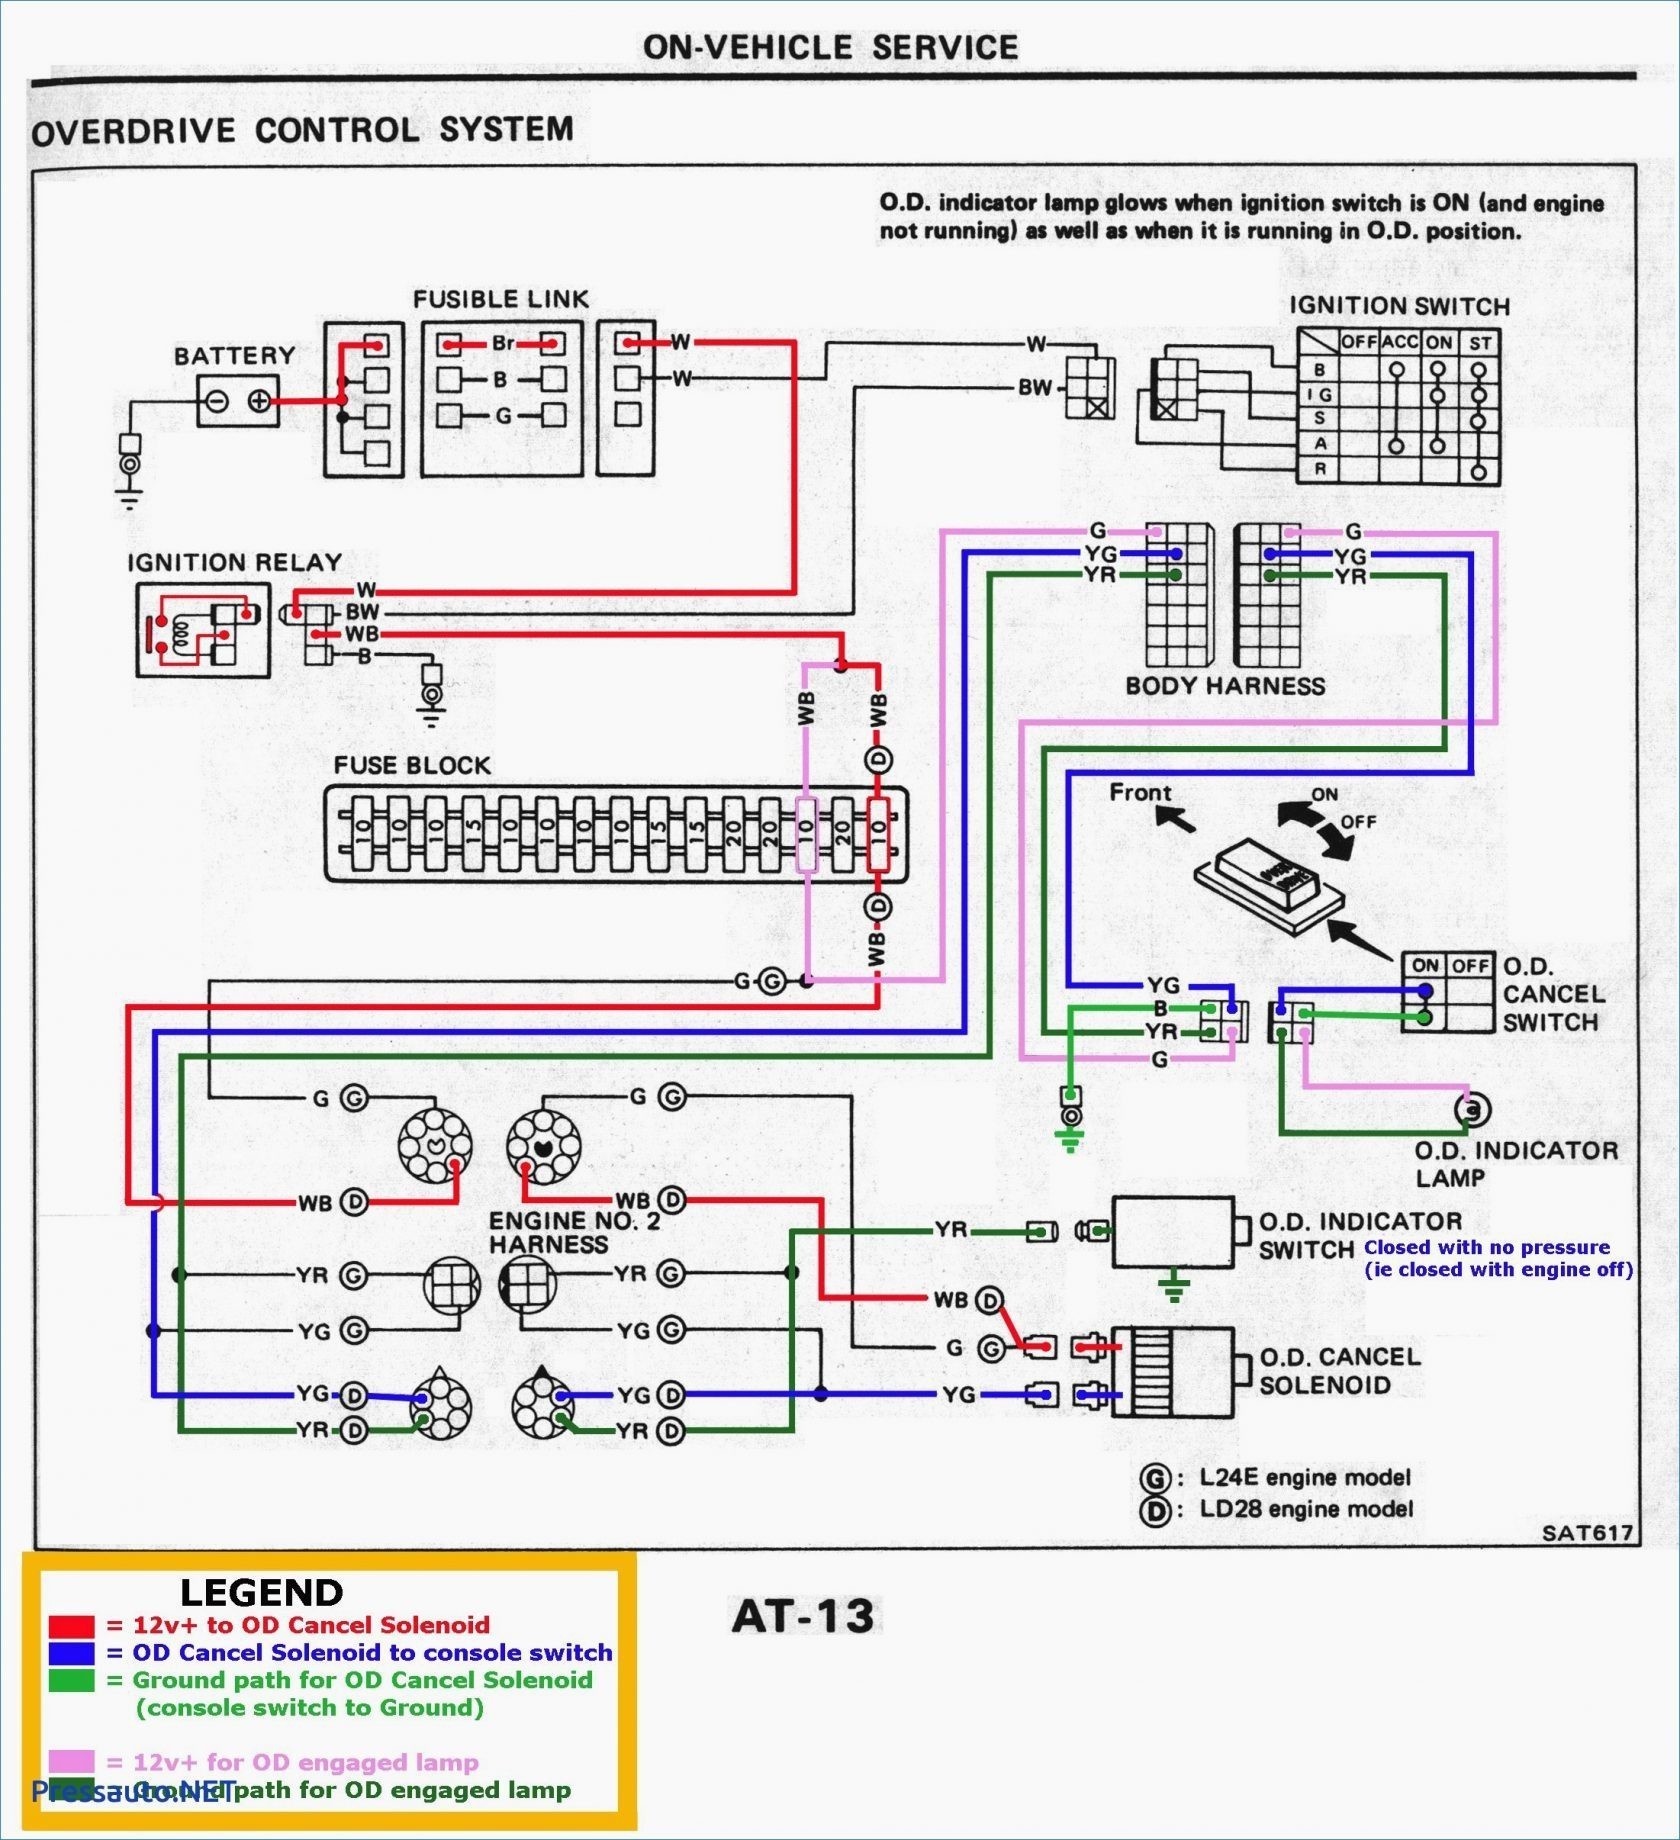 Wiring Diagram for Western Snow Plow Mounts Chevy Truck Wiring Harness Wiring Diagram Inside Of Wiring Diagram for Western Snow Plow